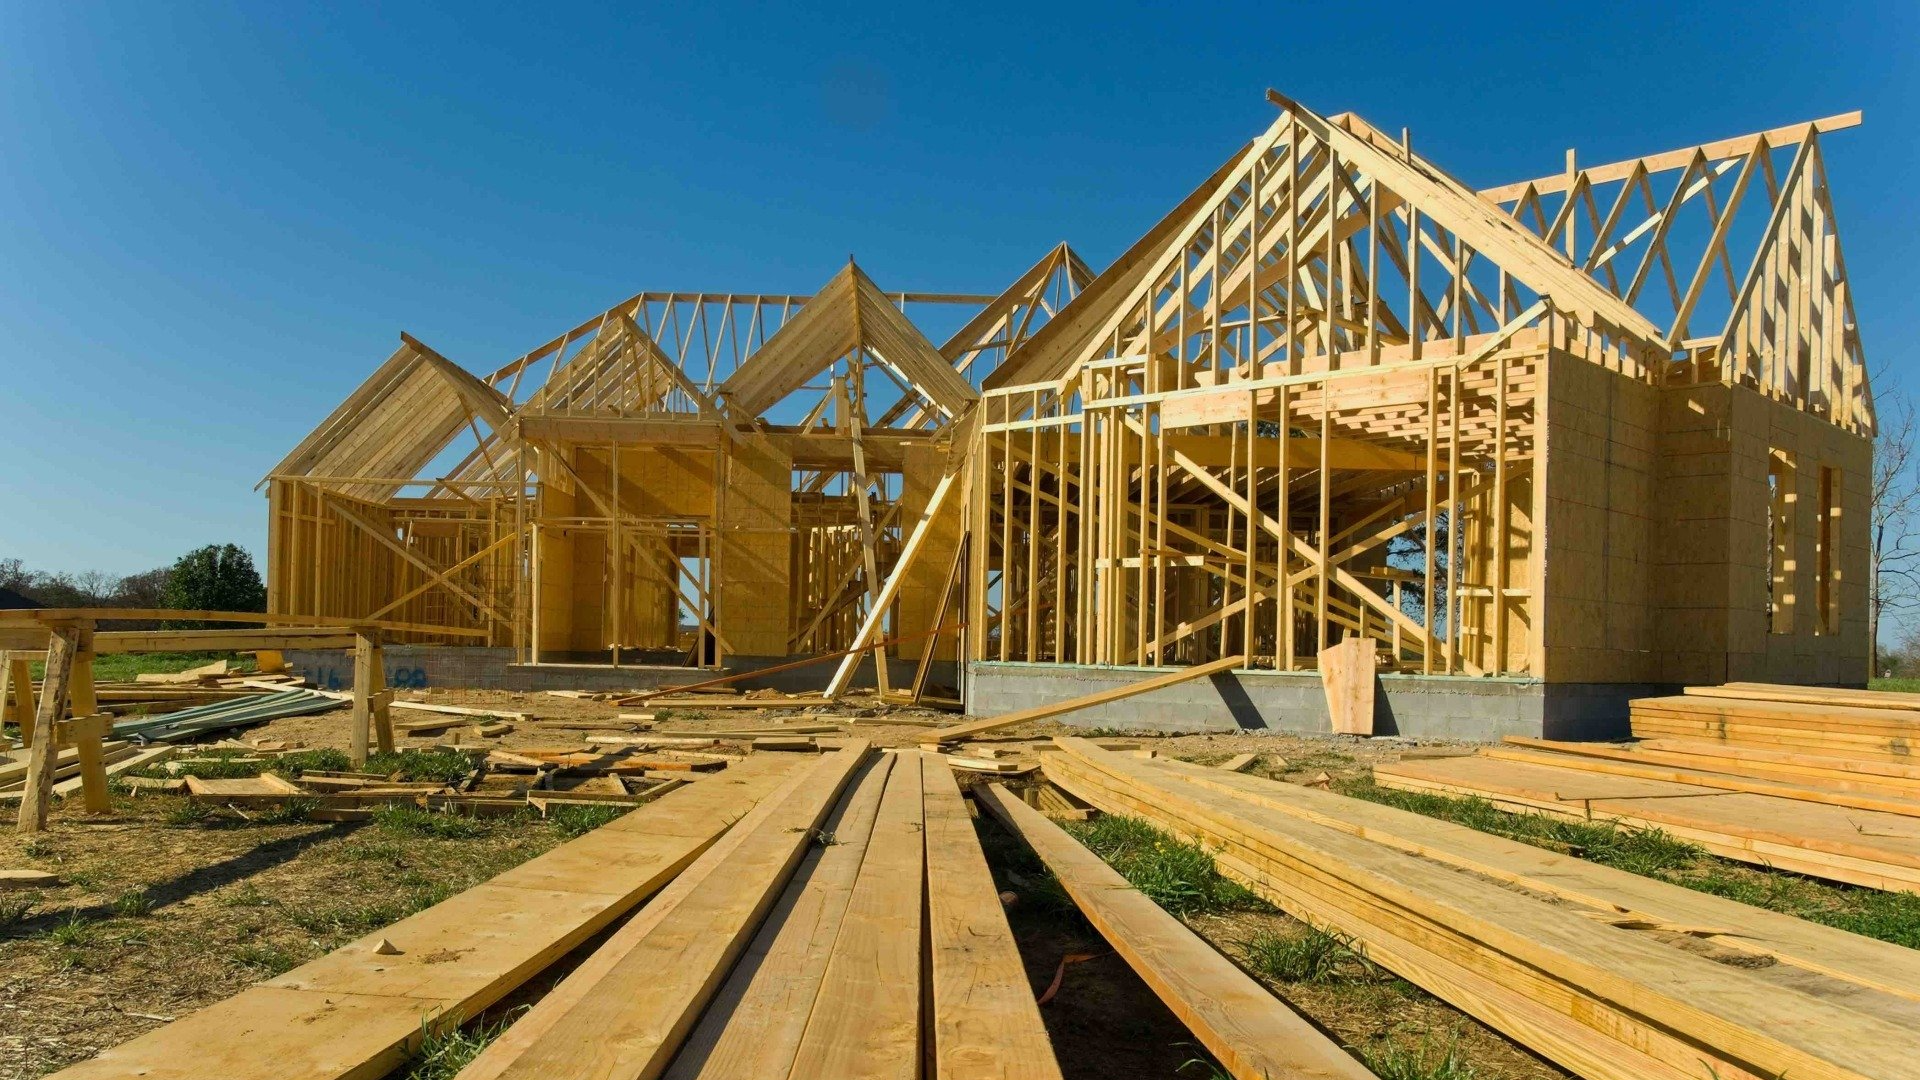 Where to buy wood and lumber in Michigan? Building Materials Michigan